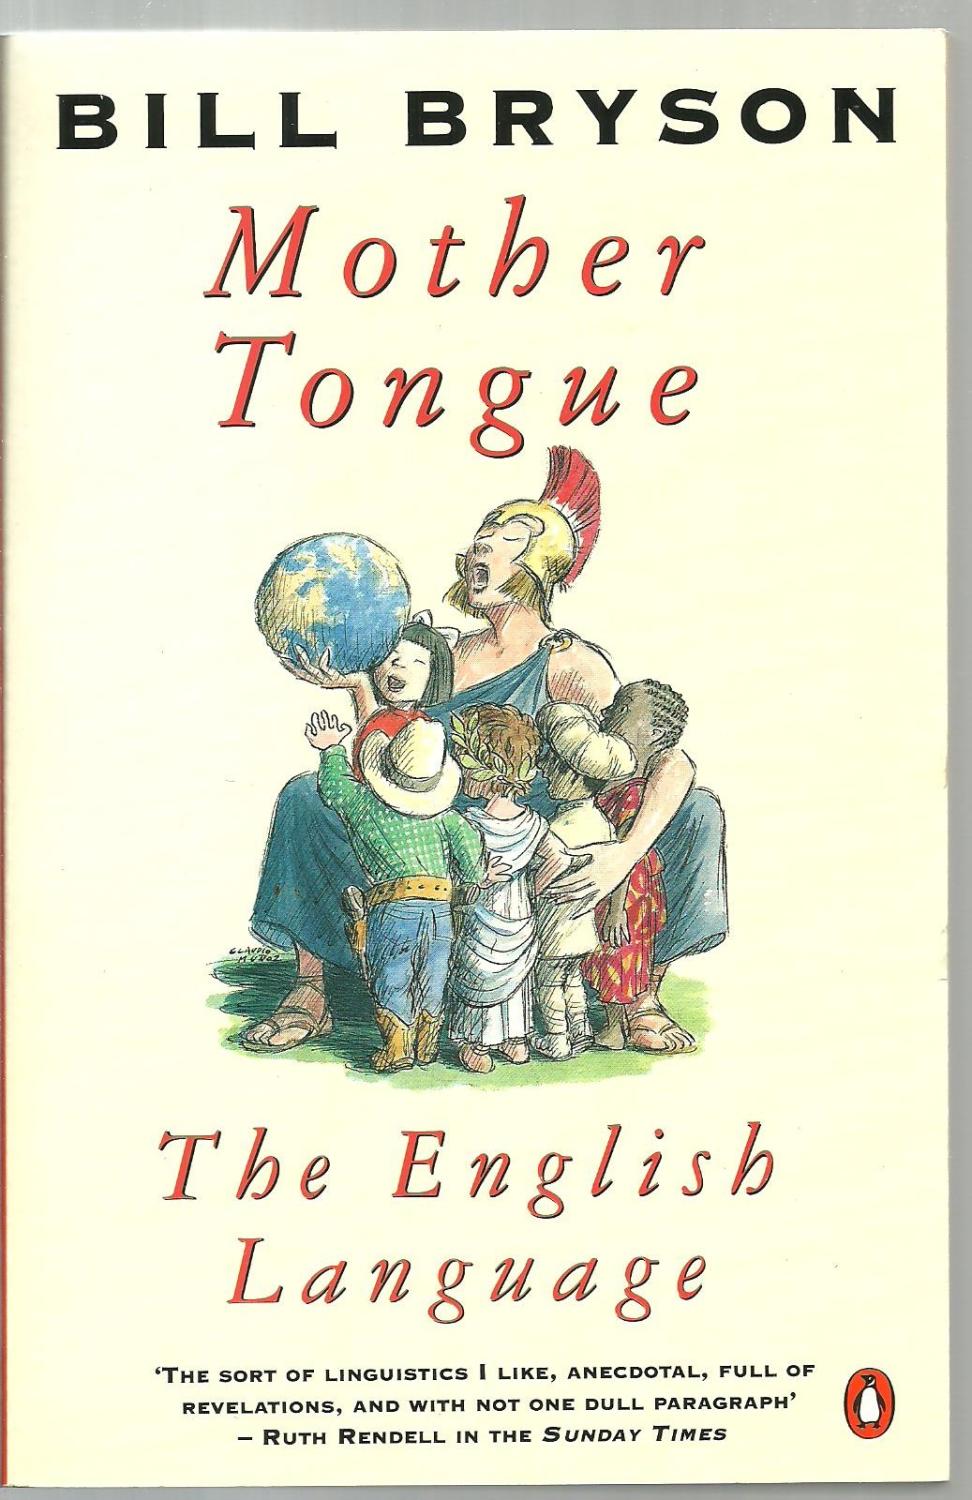 The People's Tongue: Americans and the English Language — Restless Books